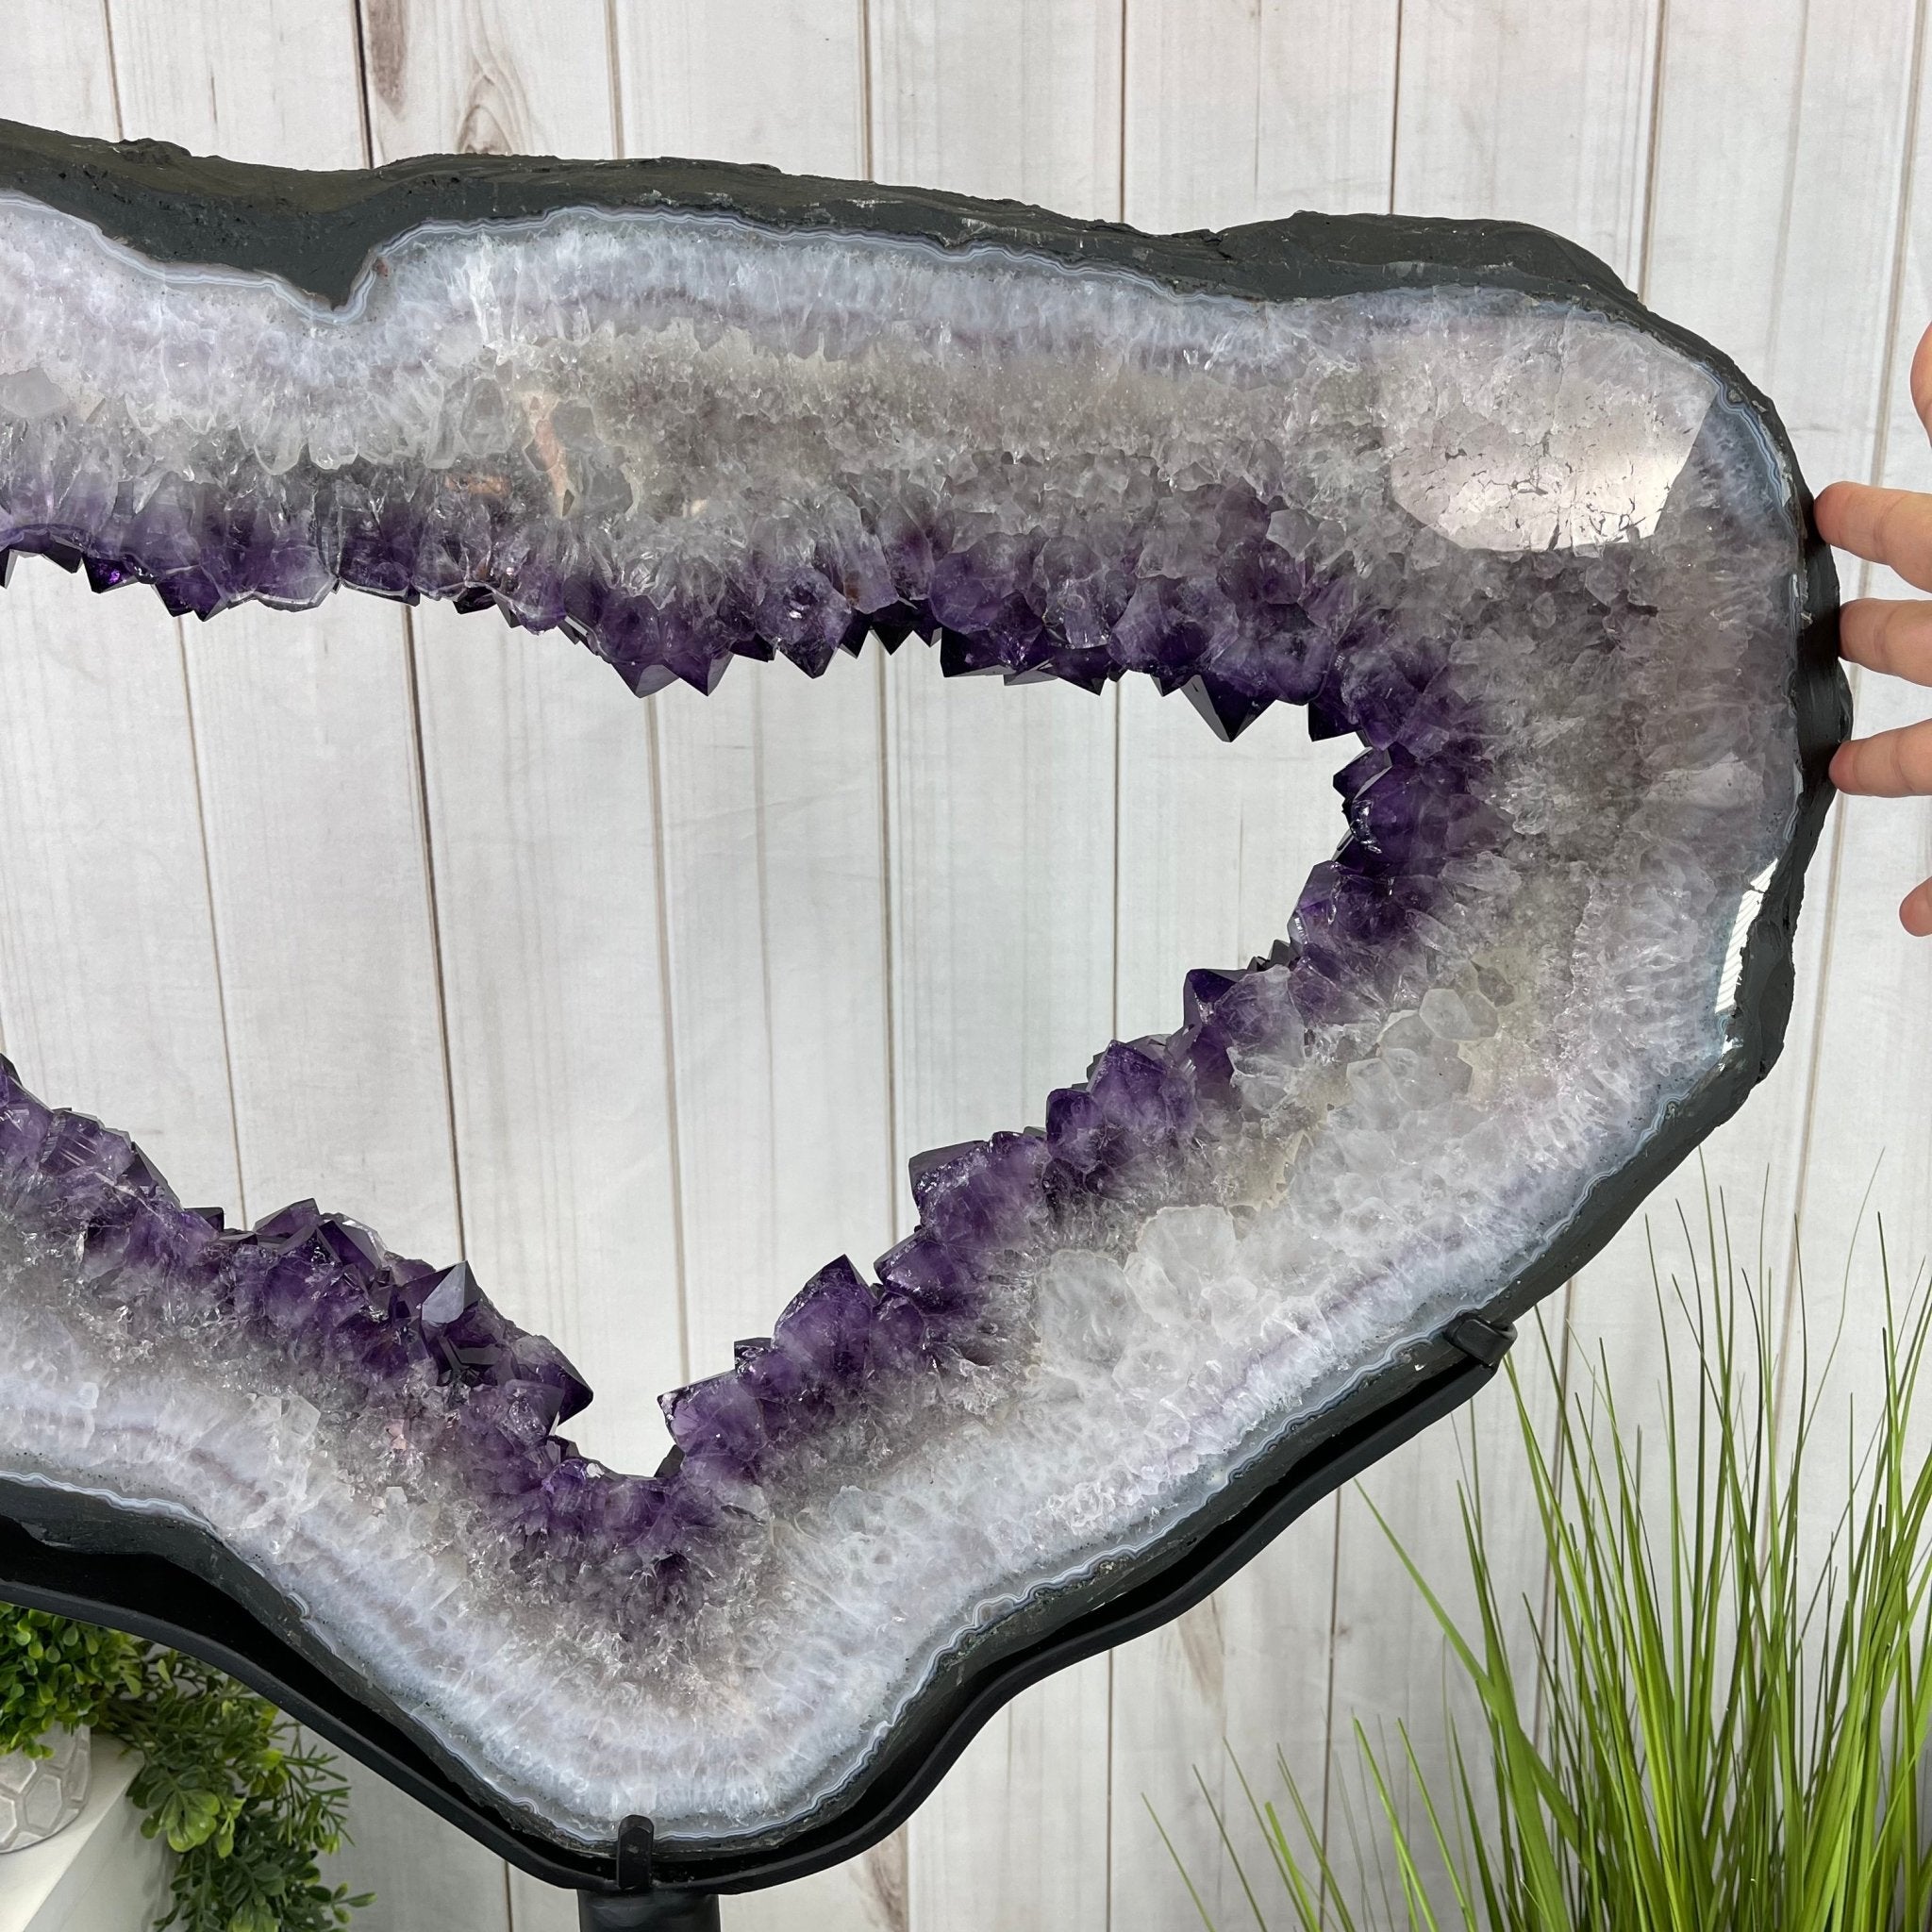 Super Quality Brazilian Amethyst Crystal Portal on a Tall Rotating Stand, 71.8 lbs & 61.75" tall Model #5604-0107 by Brazil Gems - Brazil GemsBrazil GemsSuper Quality Brazilian Amethyst Crystal Portal on a Tall Rotating Stand, 71.8 lbs & 61.75" tall Model #5604-0107 by Brazil GemsPortals on Rotating Bases5604-0107